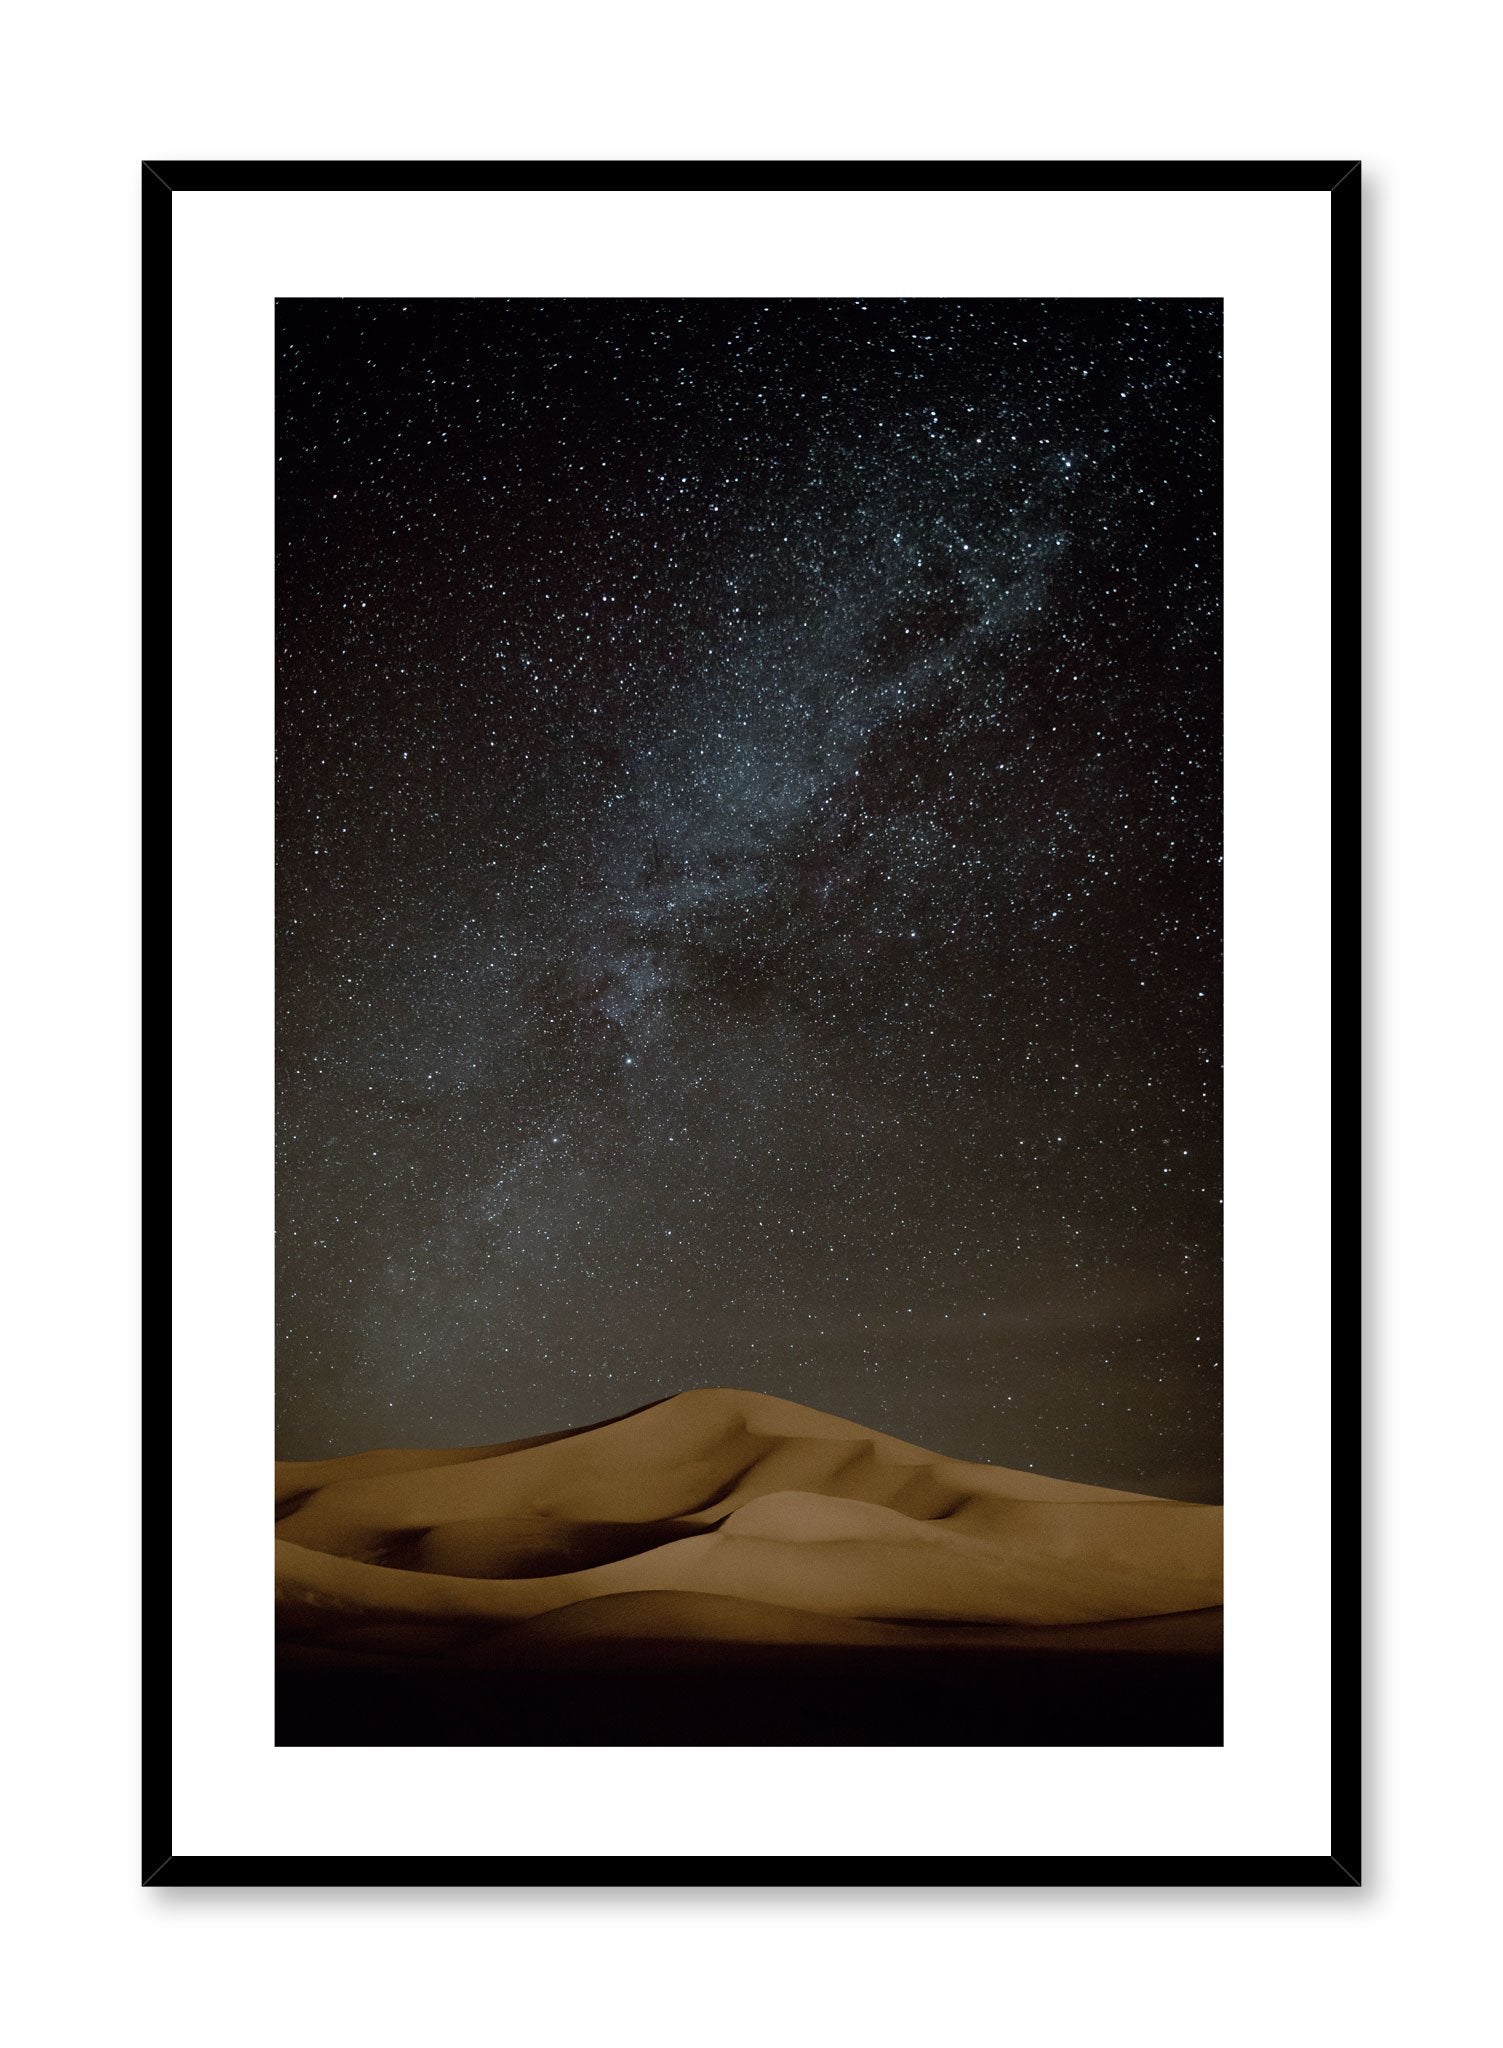 Celestial photography poster by Opposite Wall with galaxy over desert